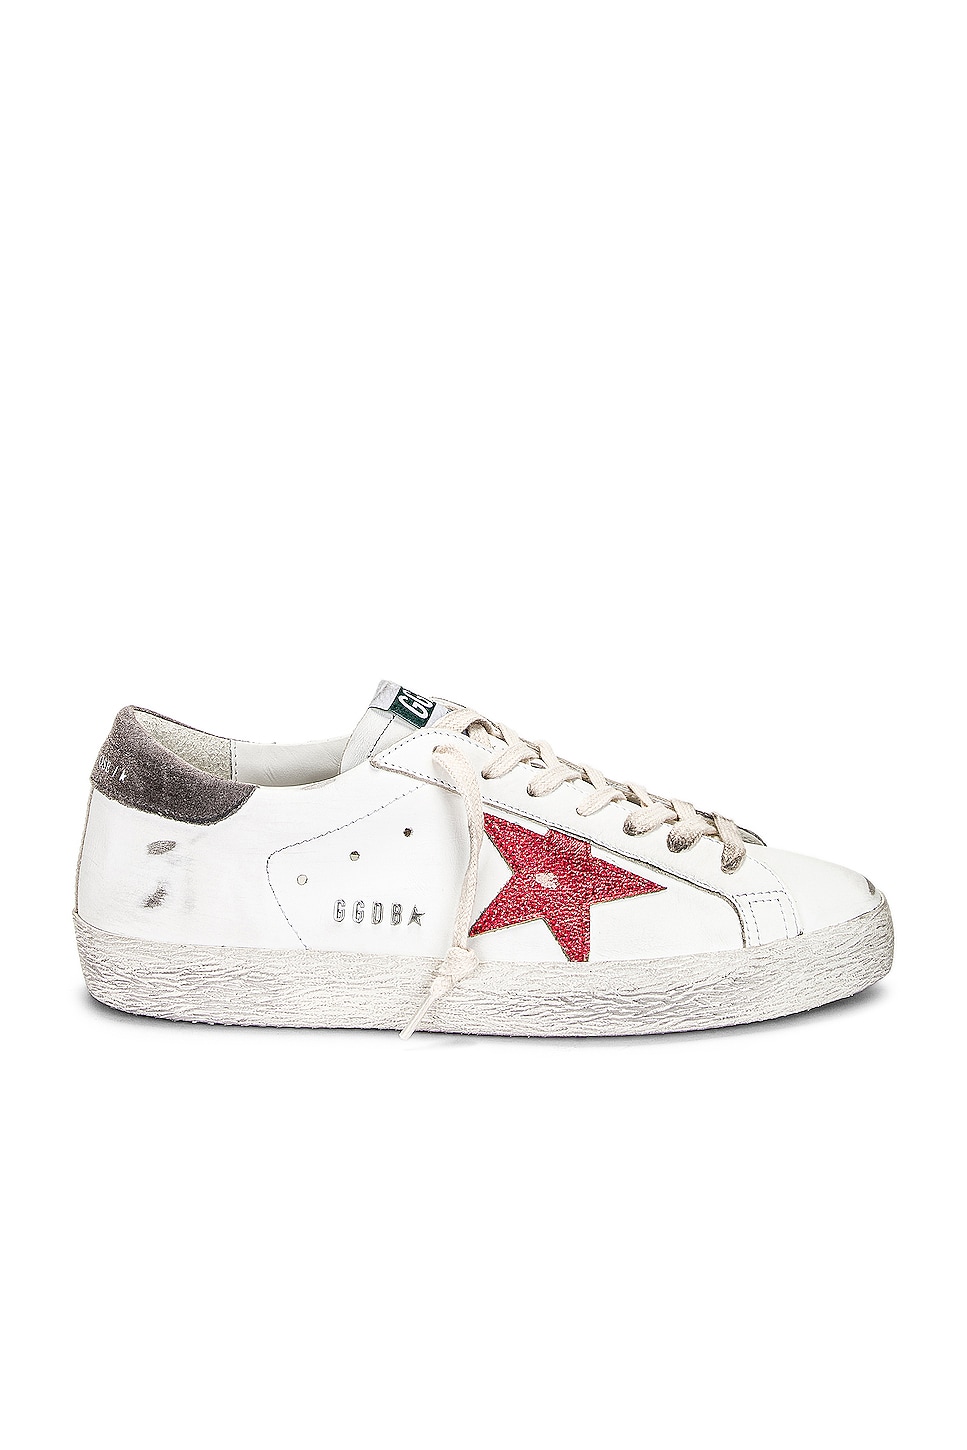 Image 1 of Golden Goose Super Star In White, Red & Dark Grey in White, Red & Dark Grey